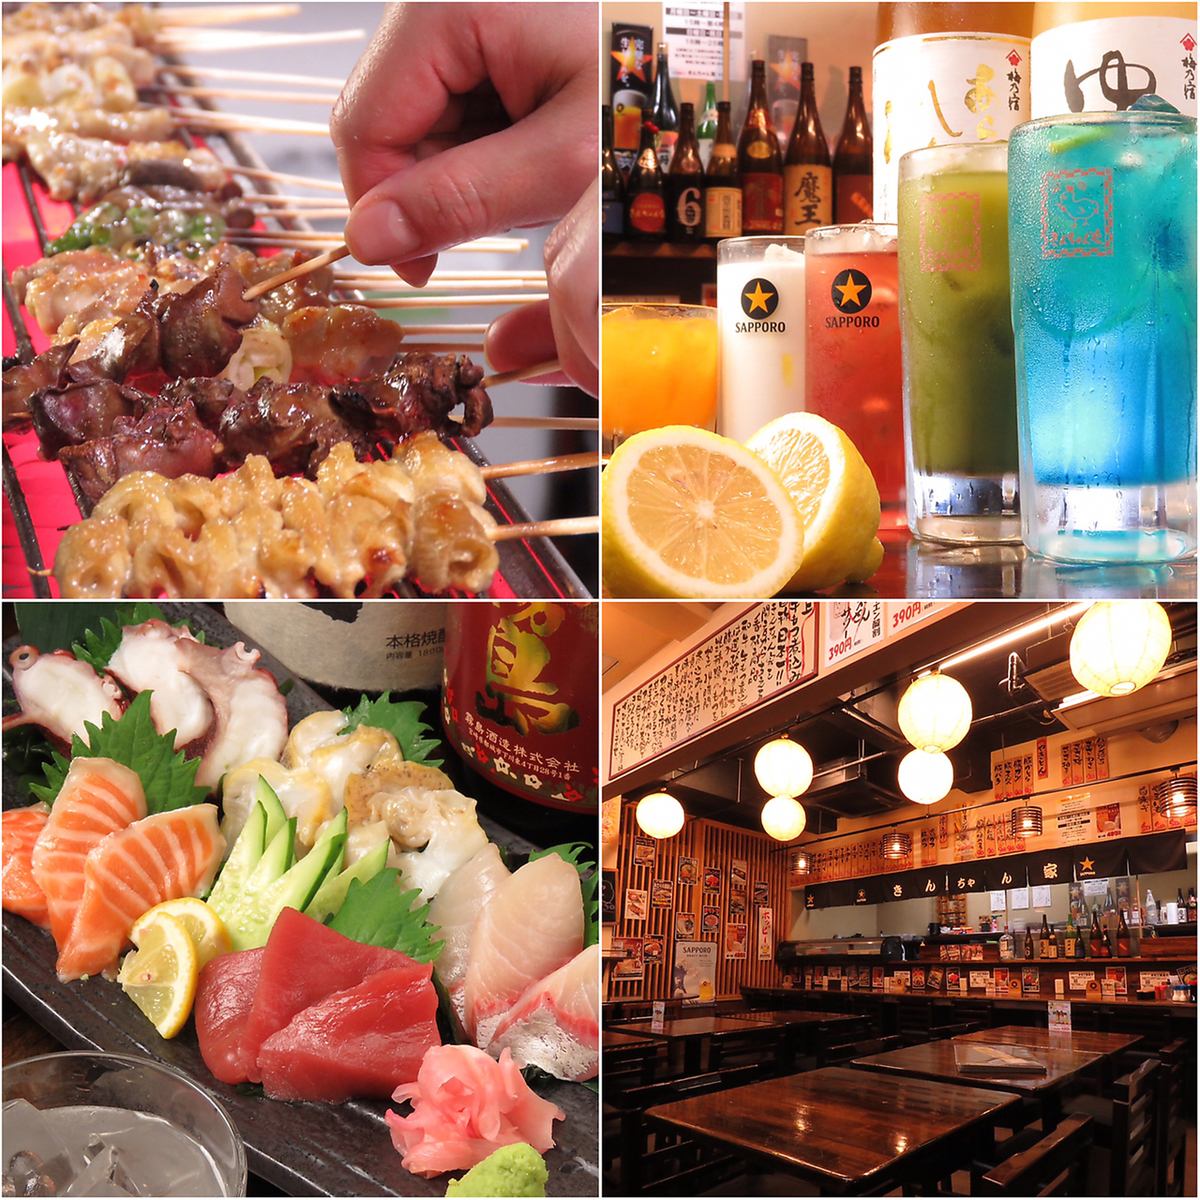 The specialty yakitori starts at 55 JPY! Fresh sashimi costs 10 JPY and is first come, first served! Check out the great coupons!